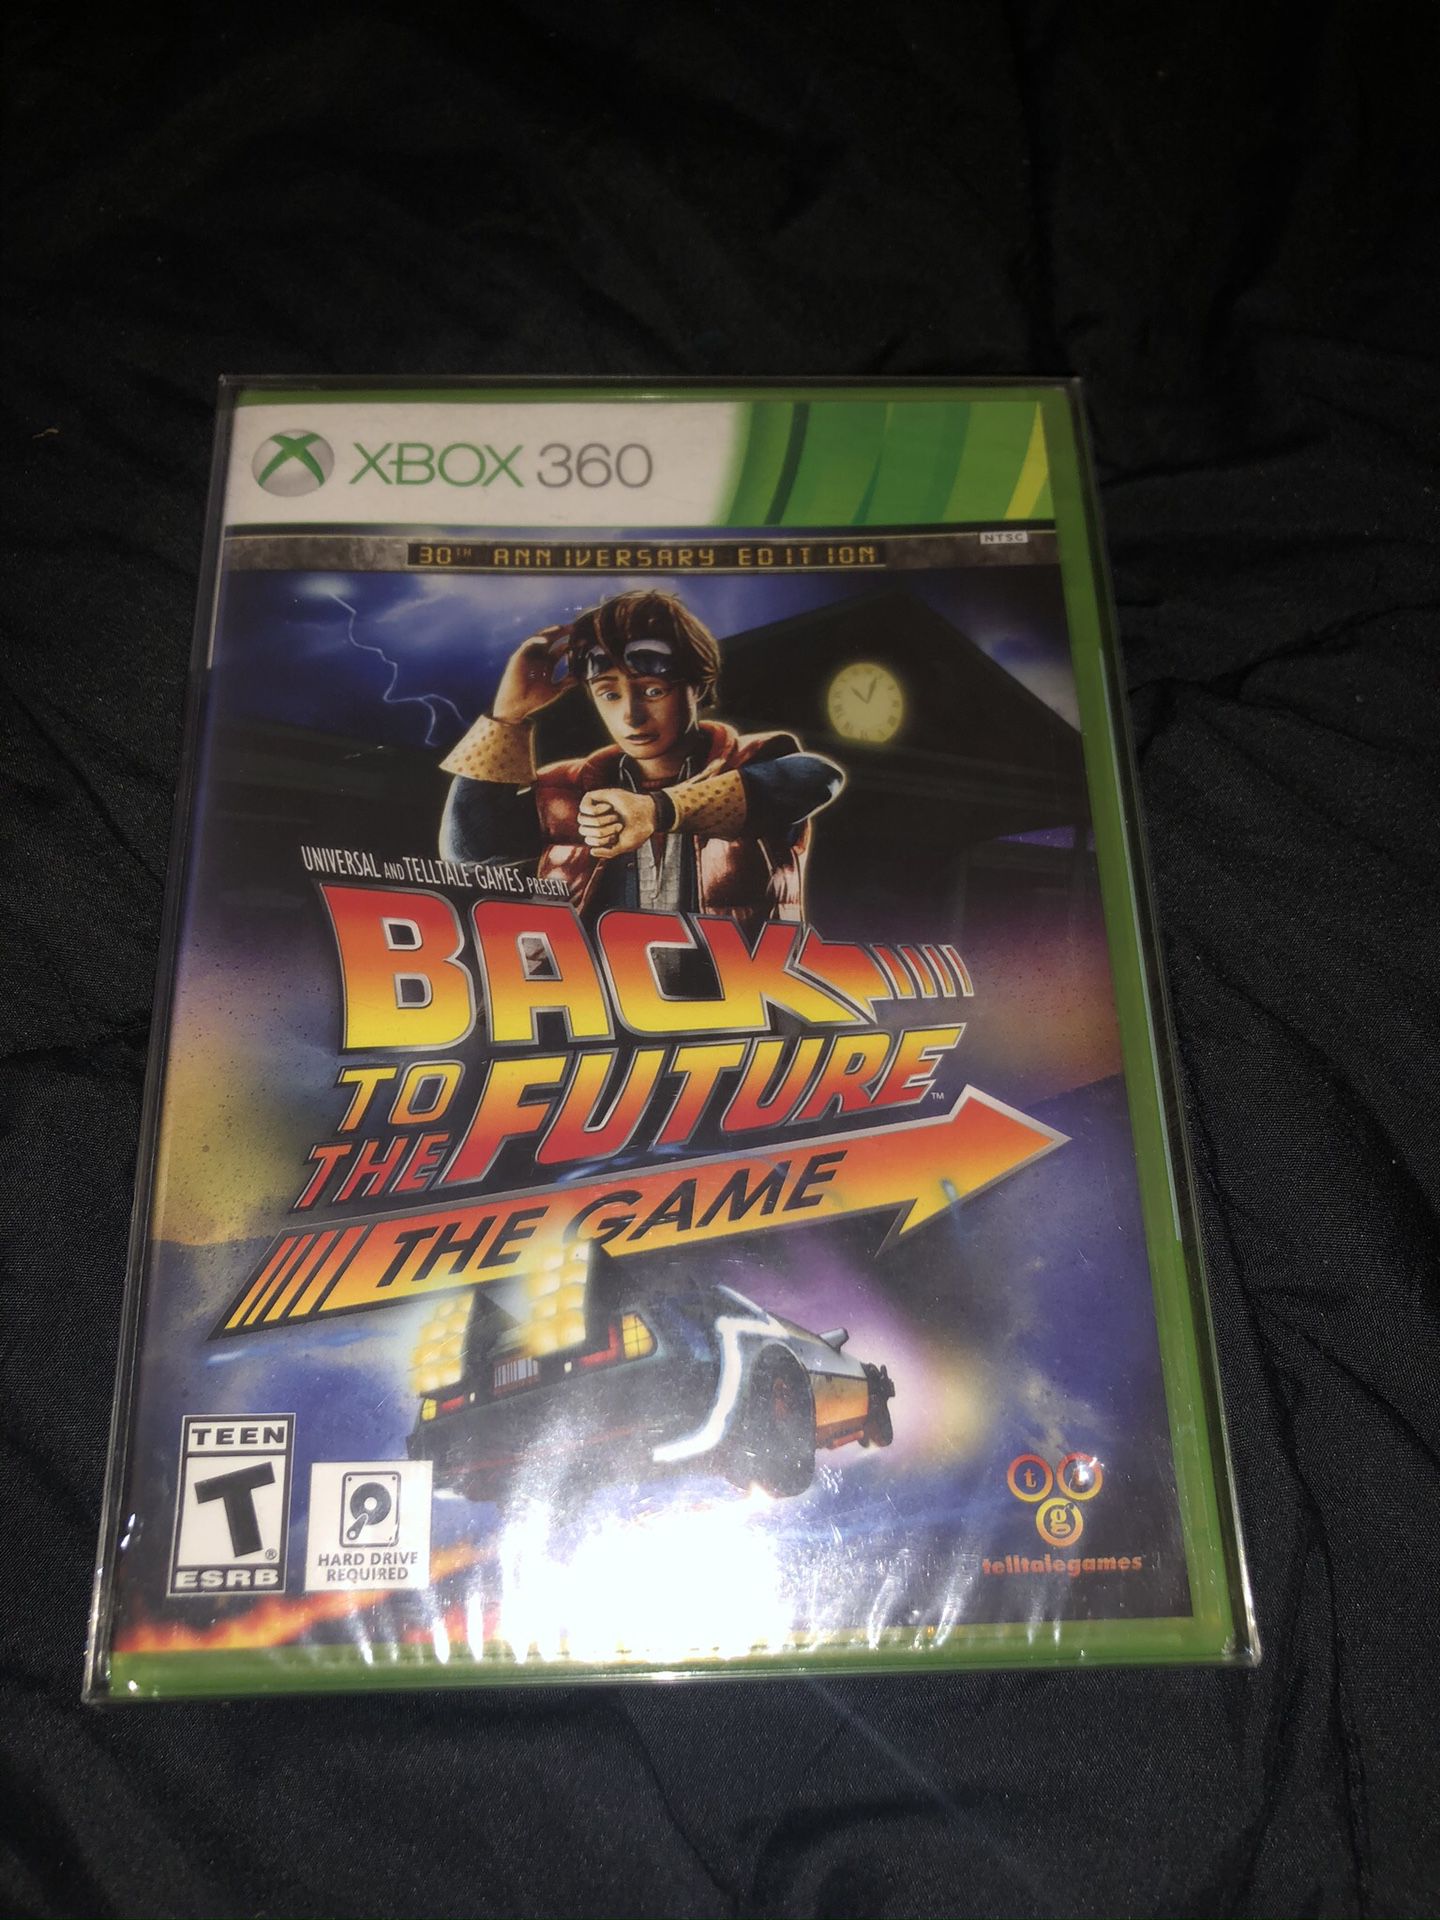 Back to the Future: The Game - 30th Anniversary Edition (Video